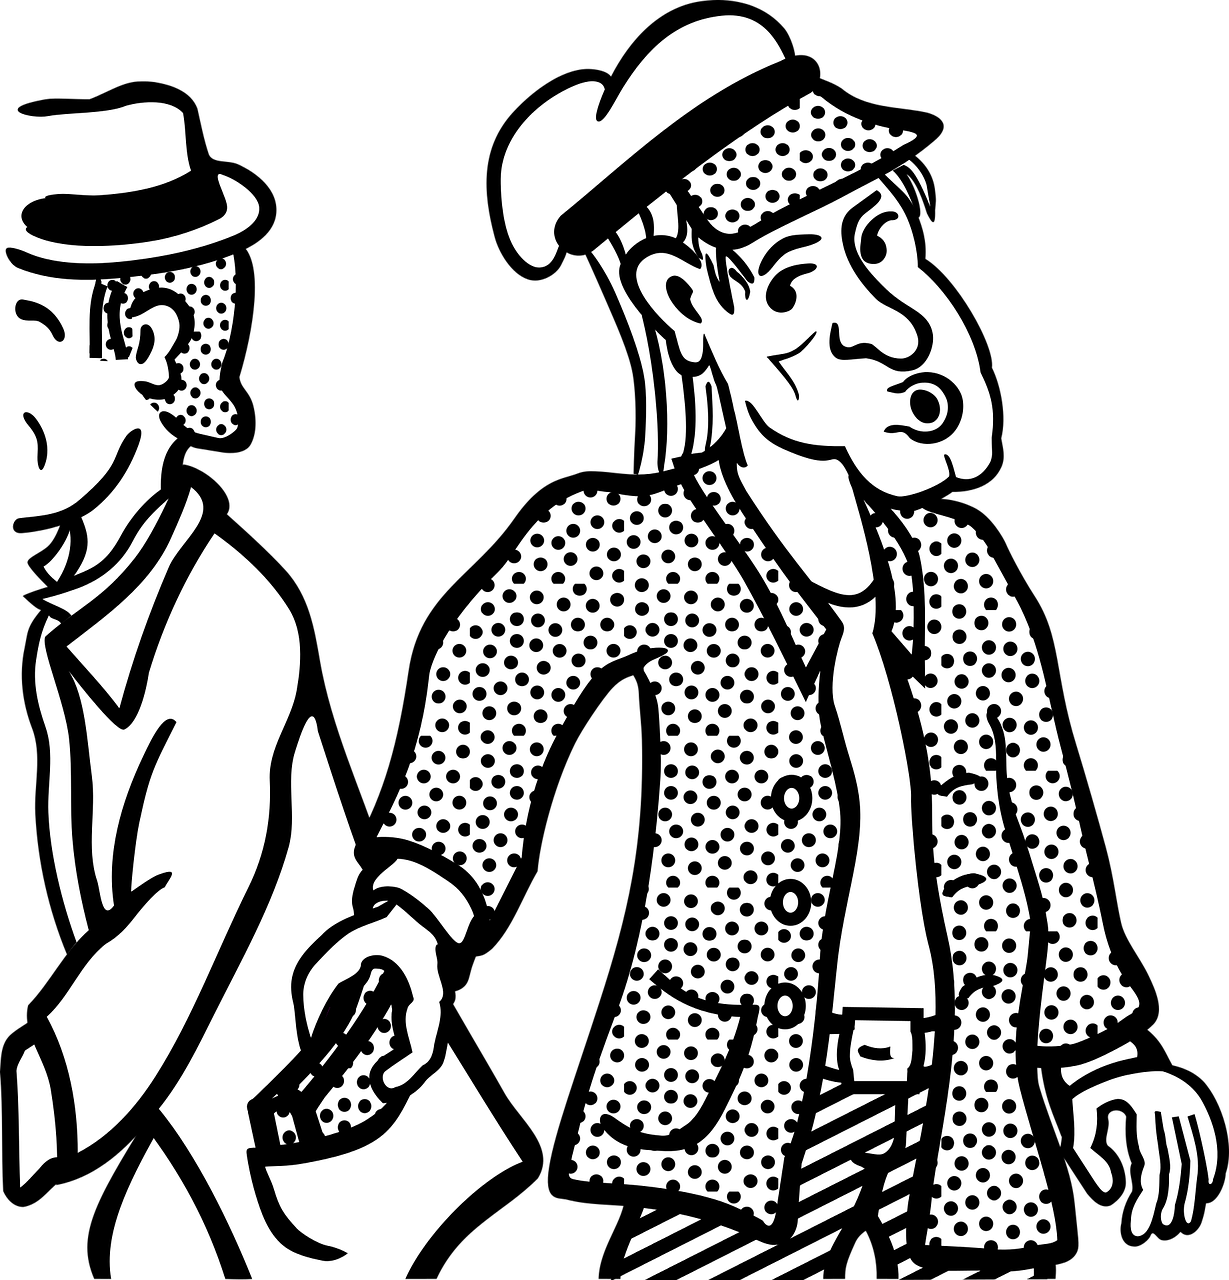 a drawing of a thief taking a wallet from another man's pocket